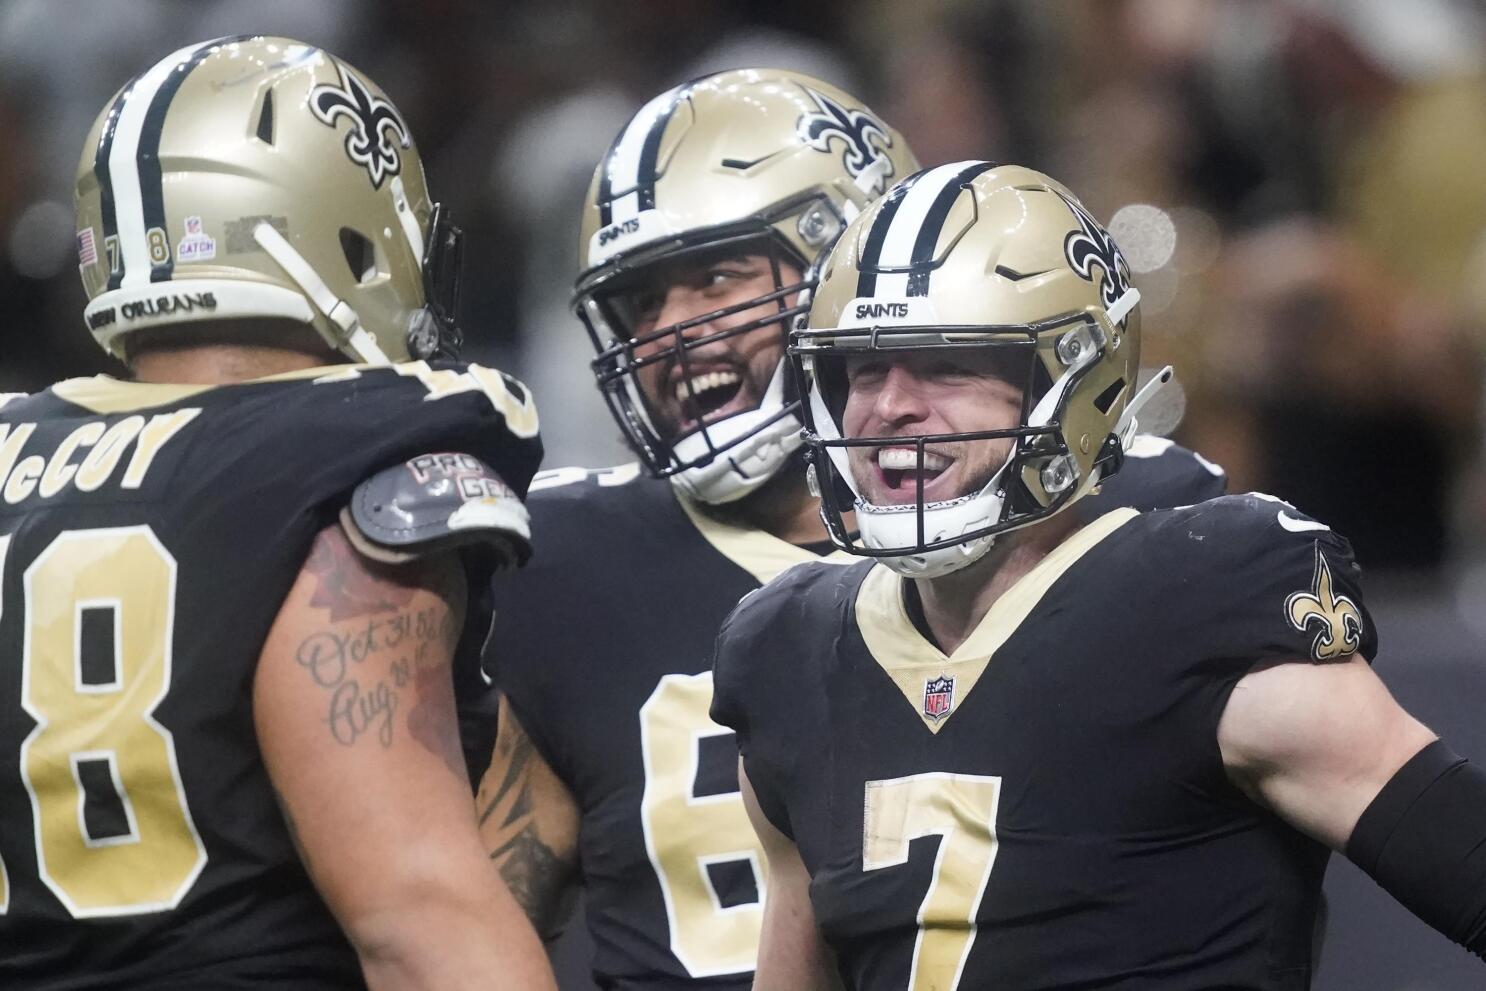 Saints win begs questions about Hill, Dalton going forward